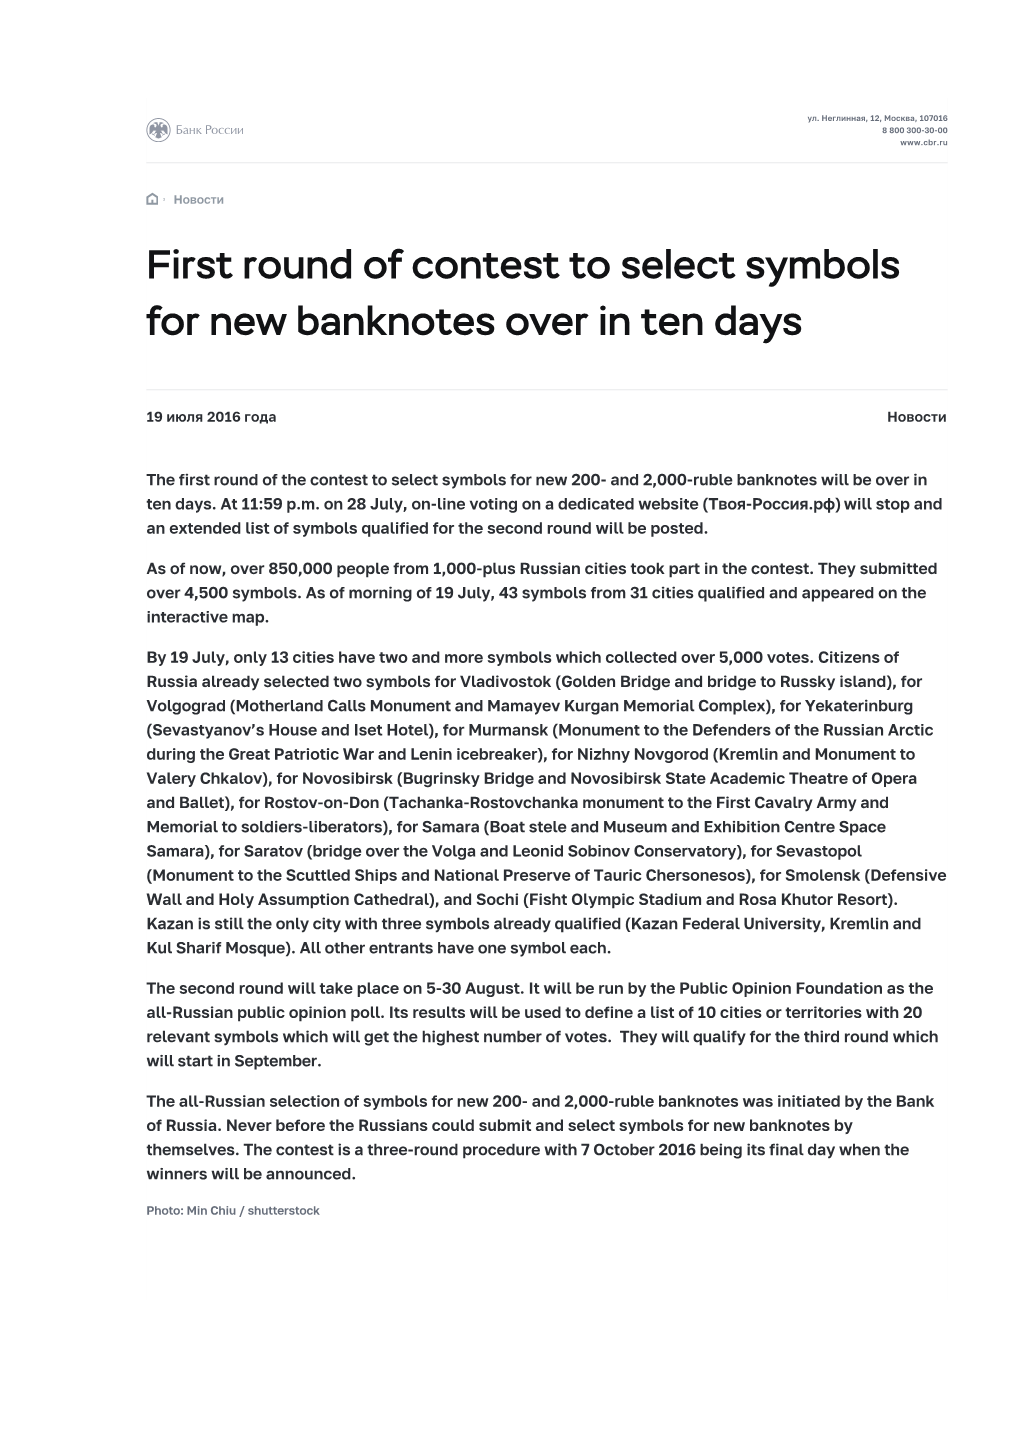 First Round of Contest to Select Symbols for New Banknotes Over in Ten Days